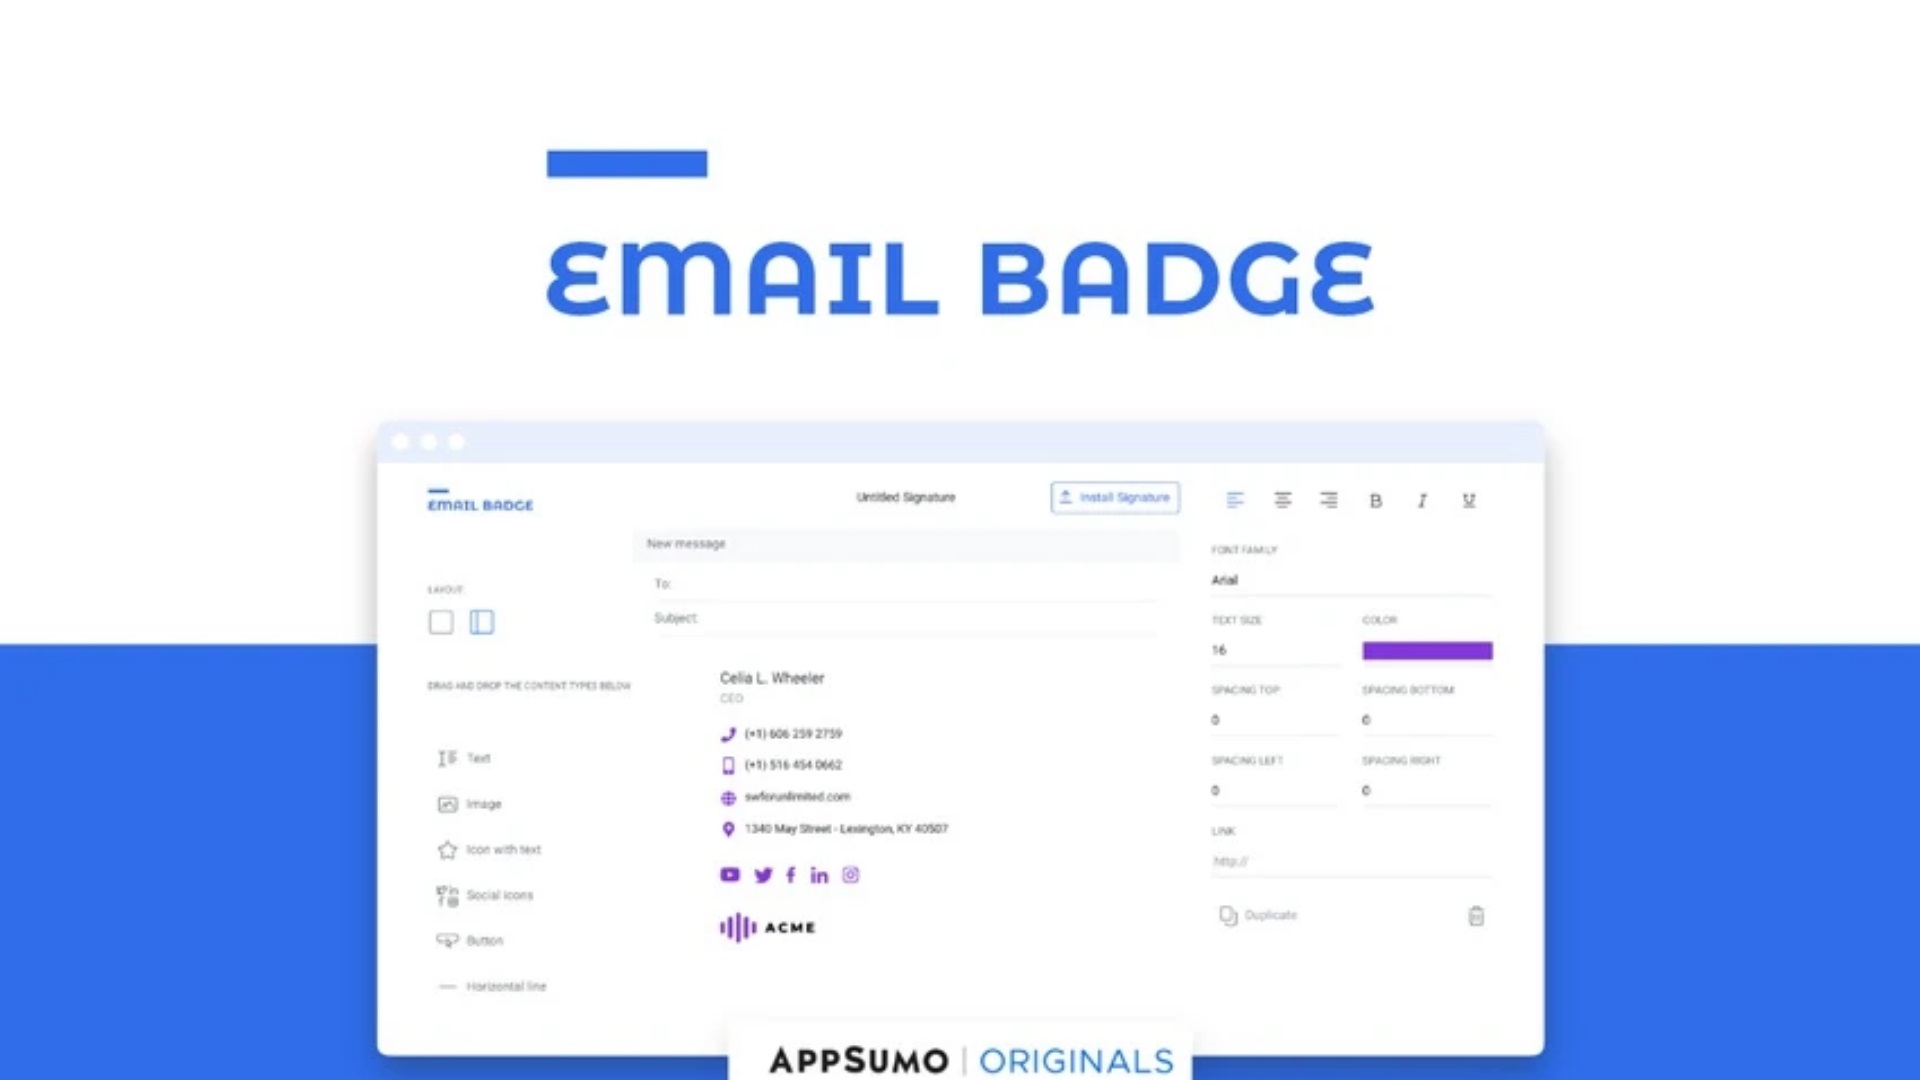 Find detailed information about EmailBadge